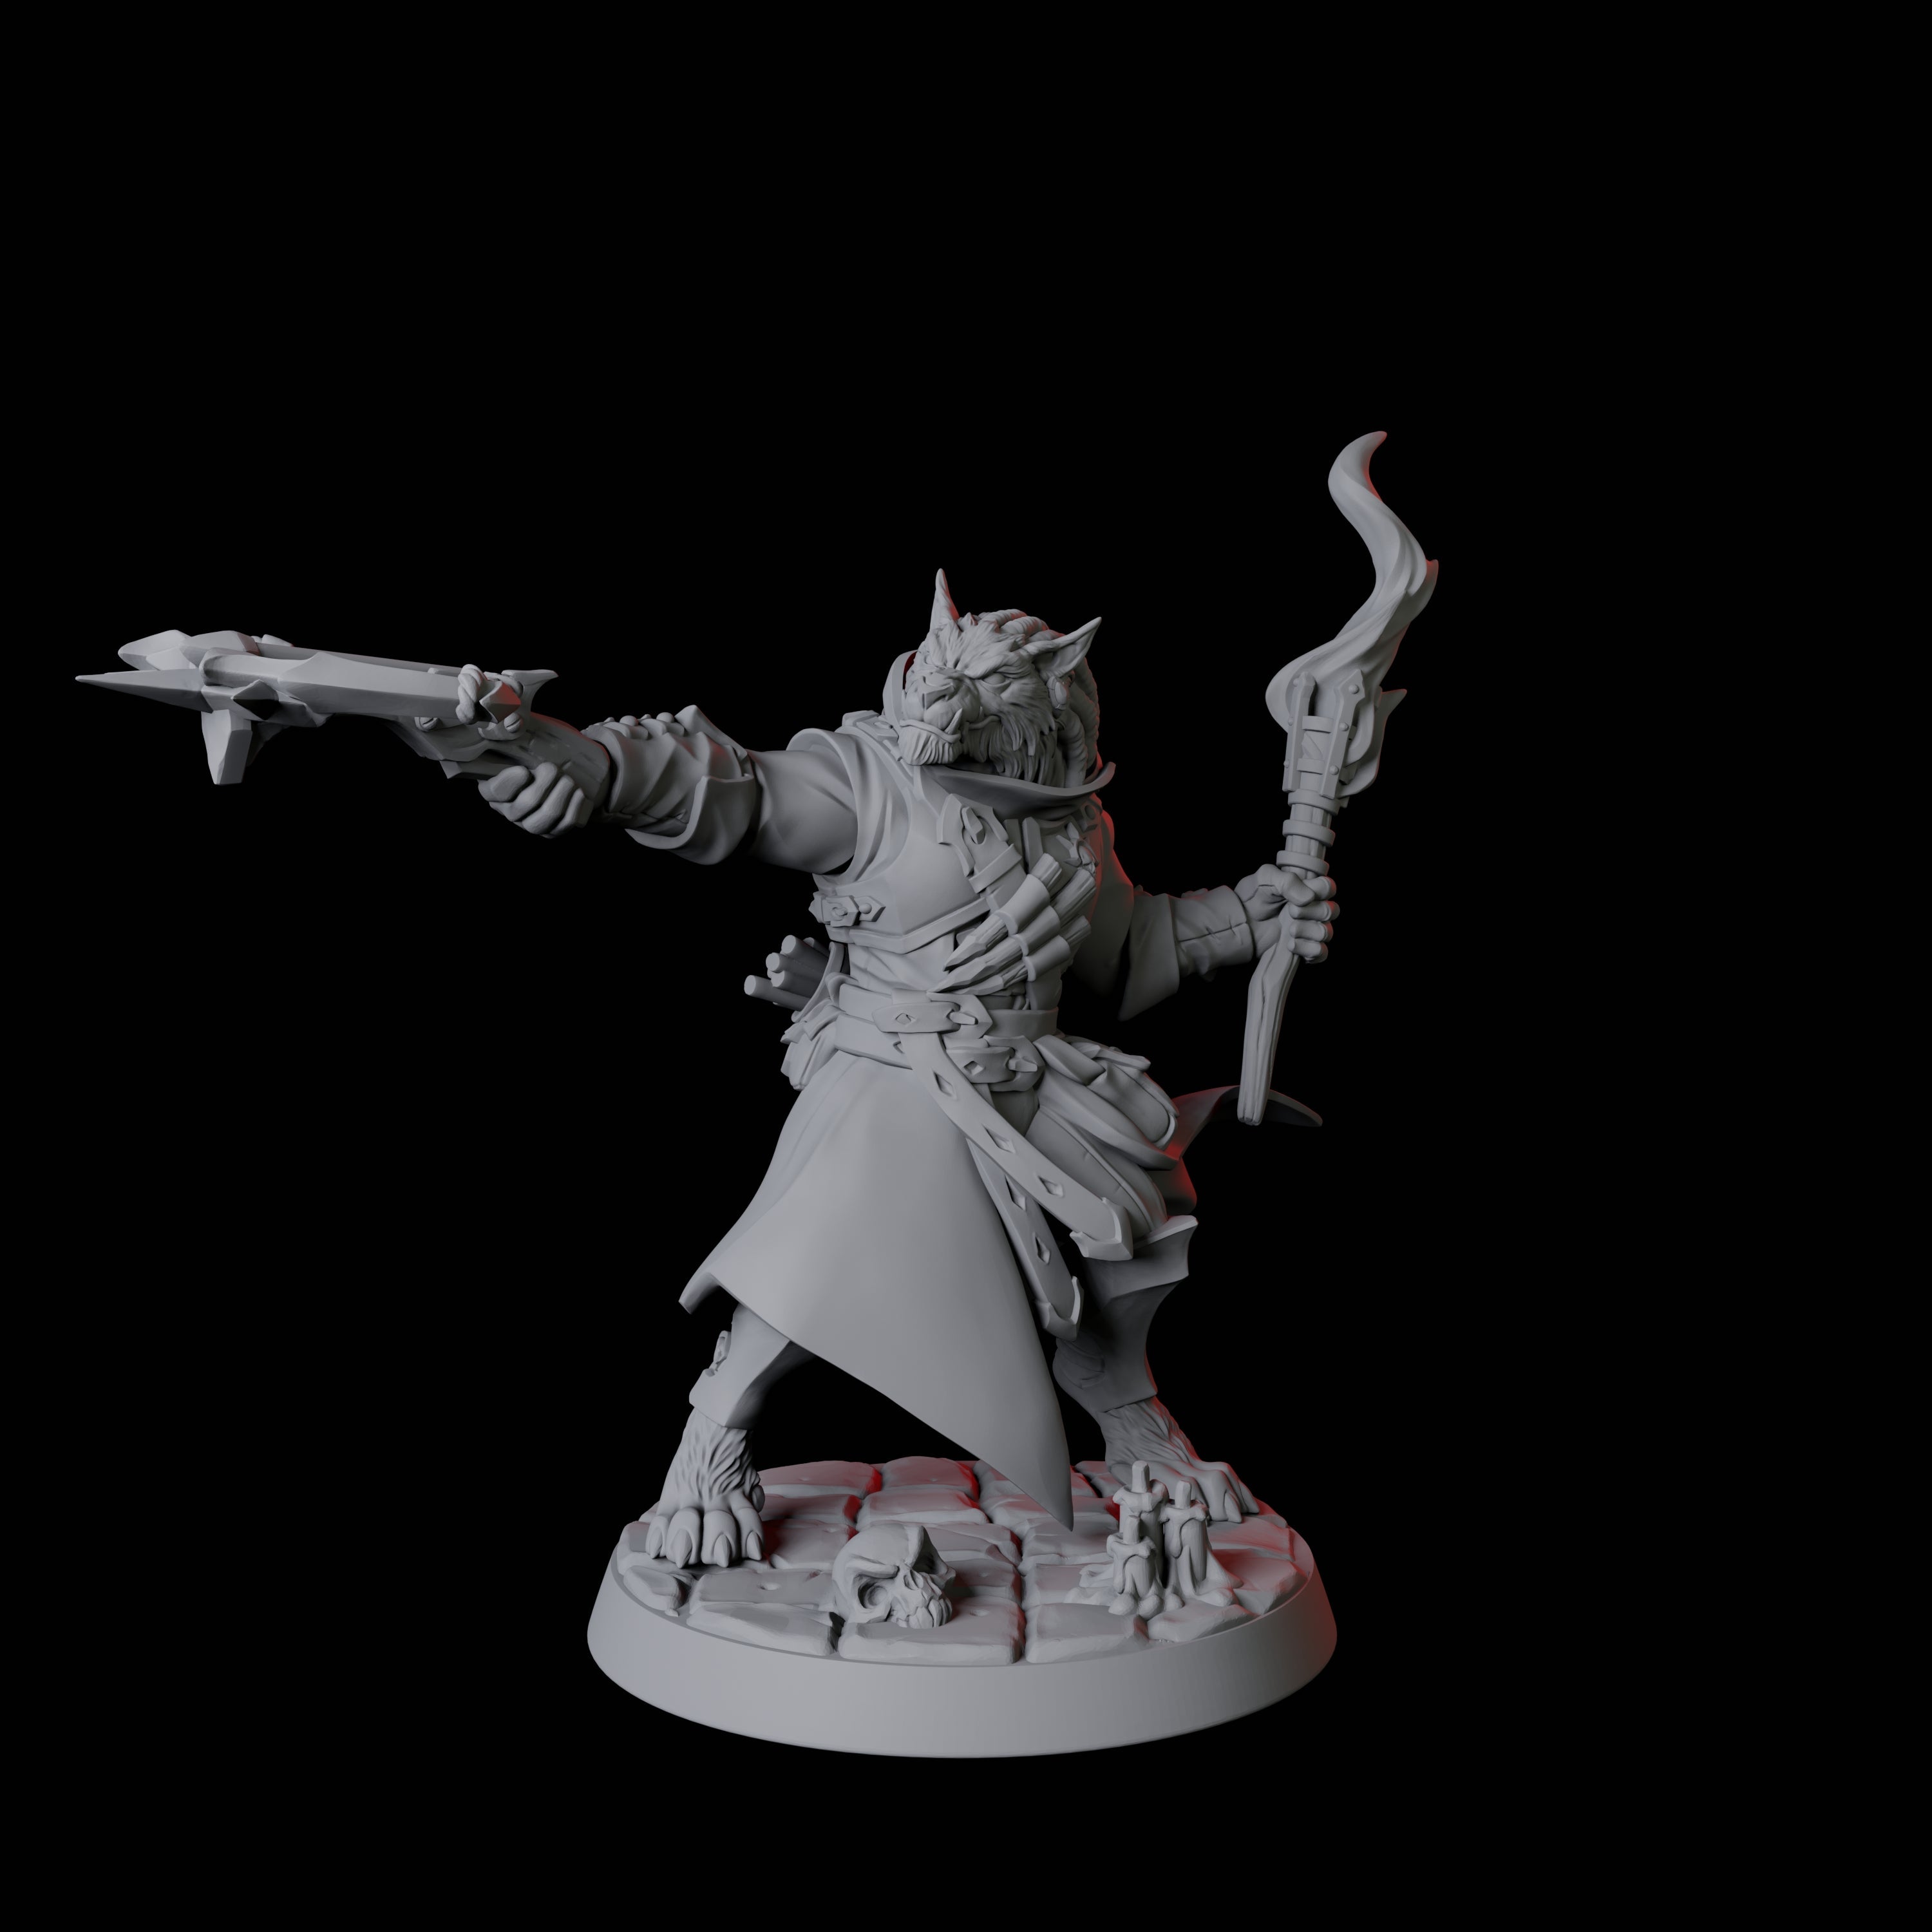 Werewolf Vampire Hunter C Miniature for Dungeons and Dragons, Pathfinder or other TTRPGs